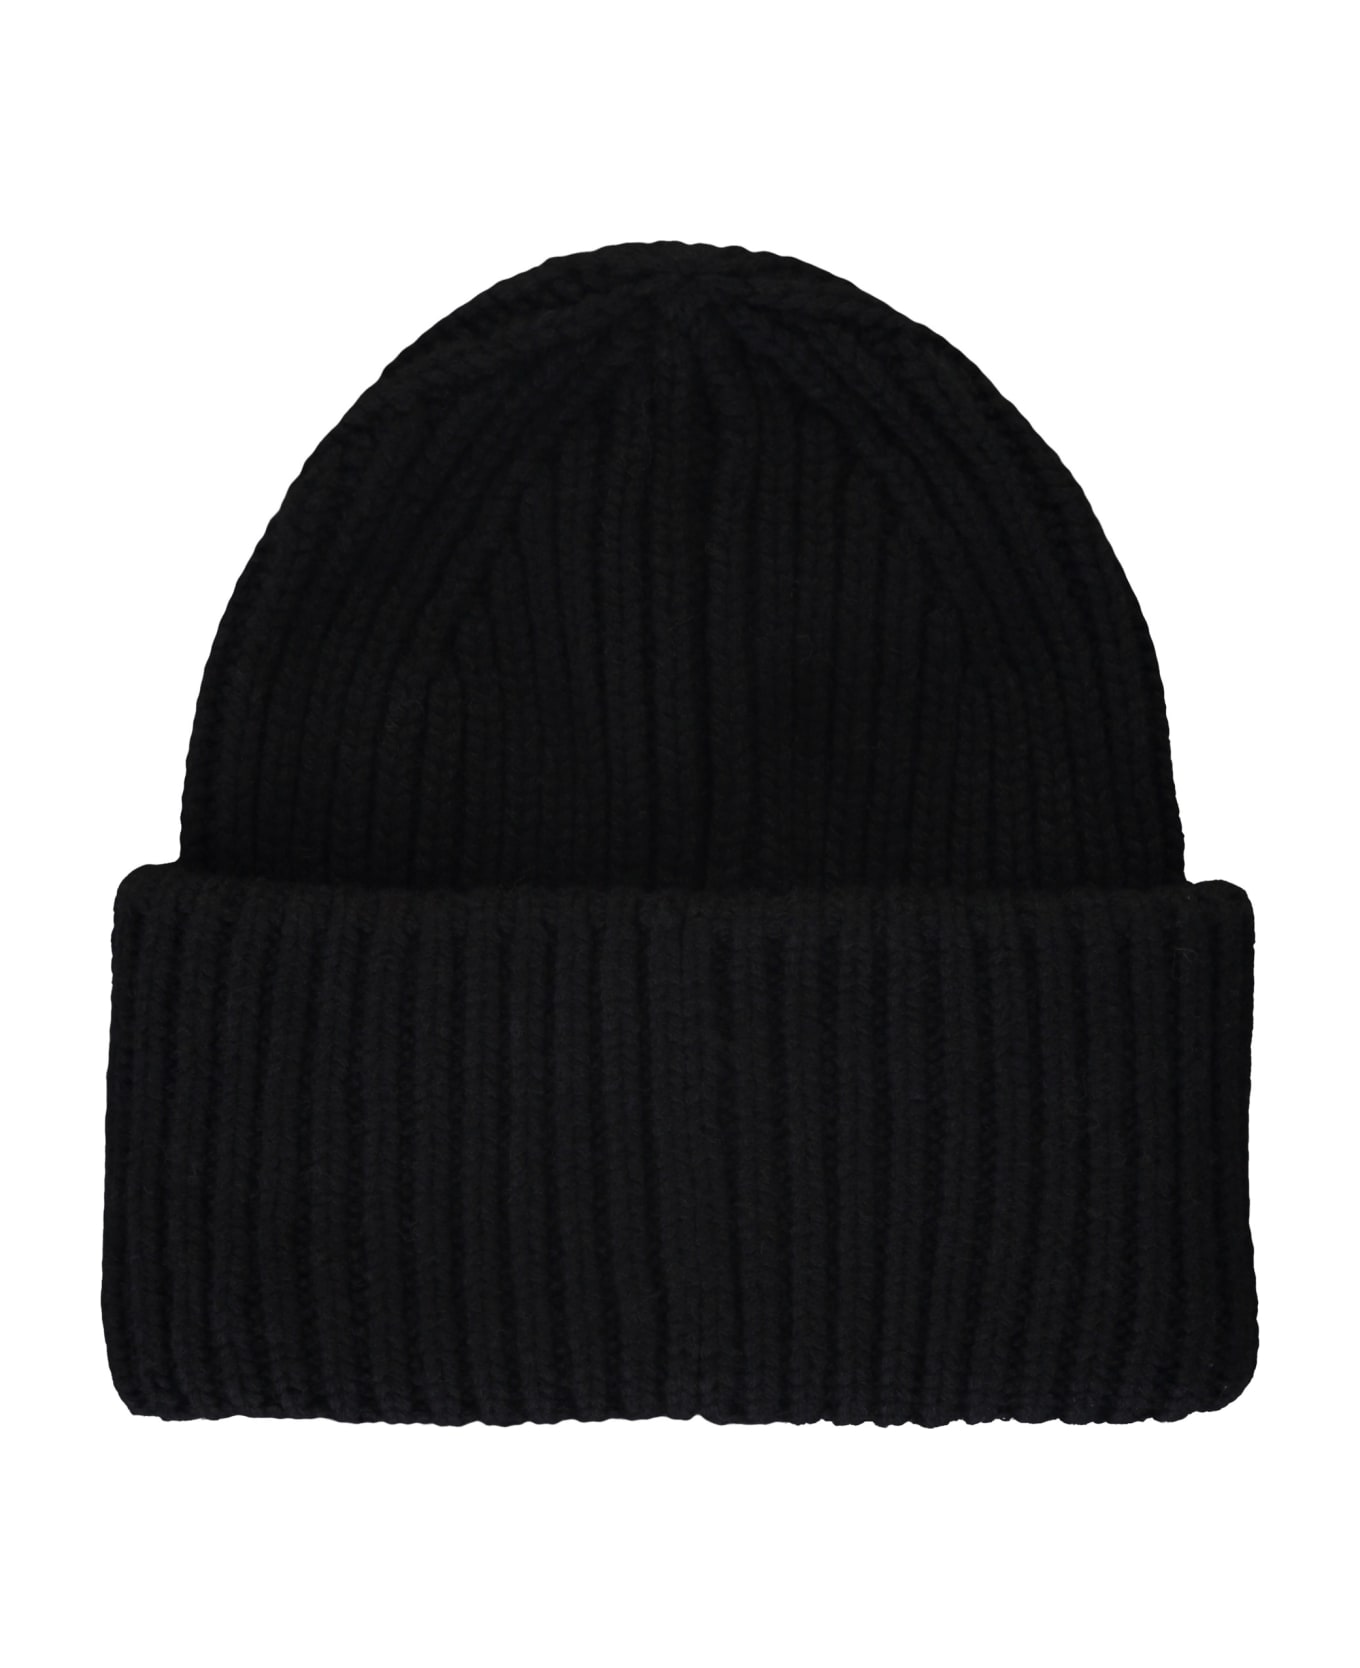 Canada Goose Ribbed Knit Beanie - black